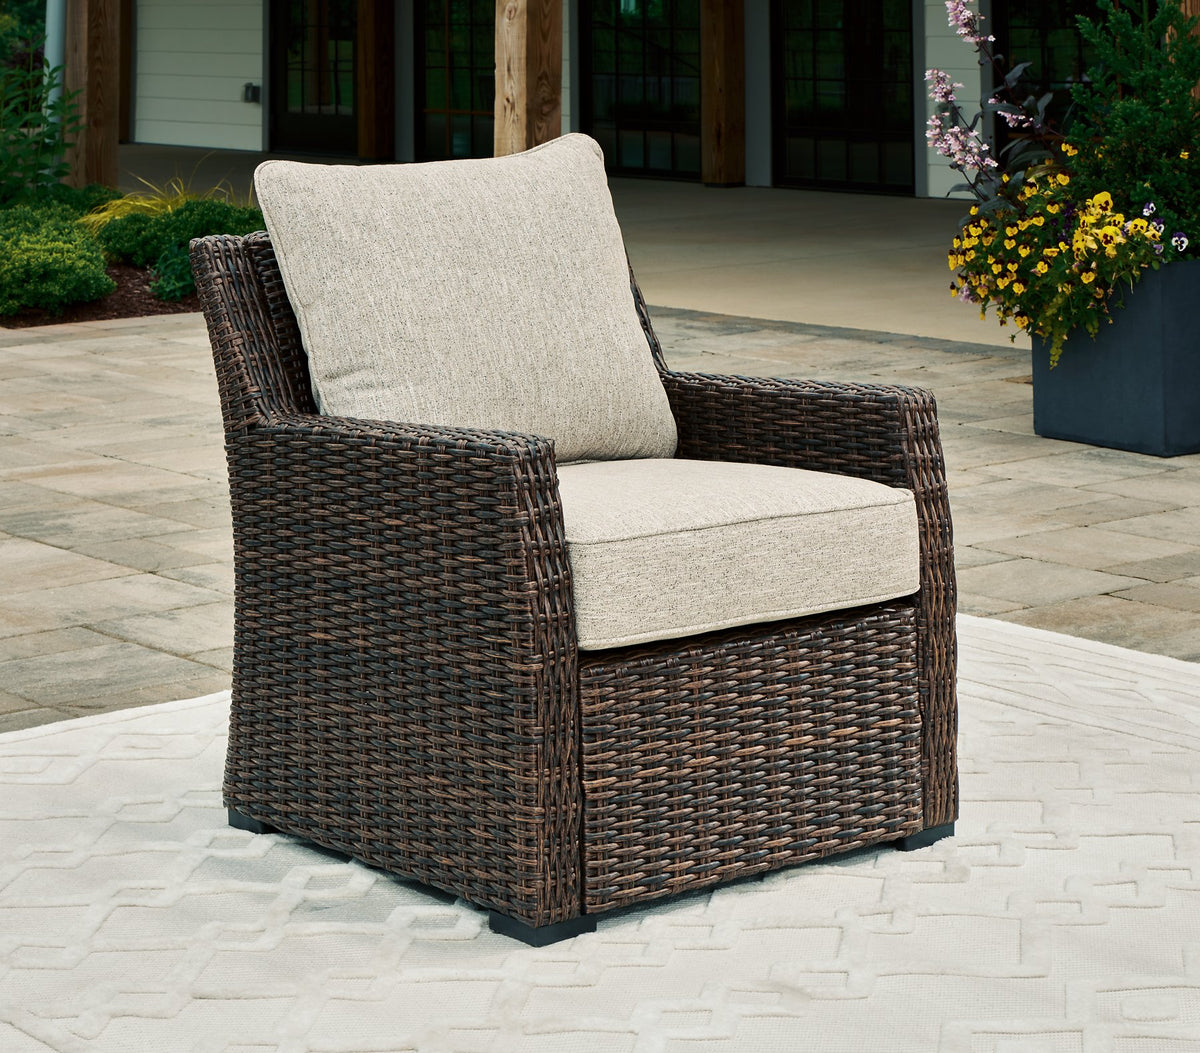 Brook Ranch Outdoor Lounge Chair with Cushion  Las Vegas Furniture Stores